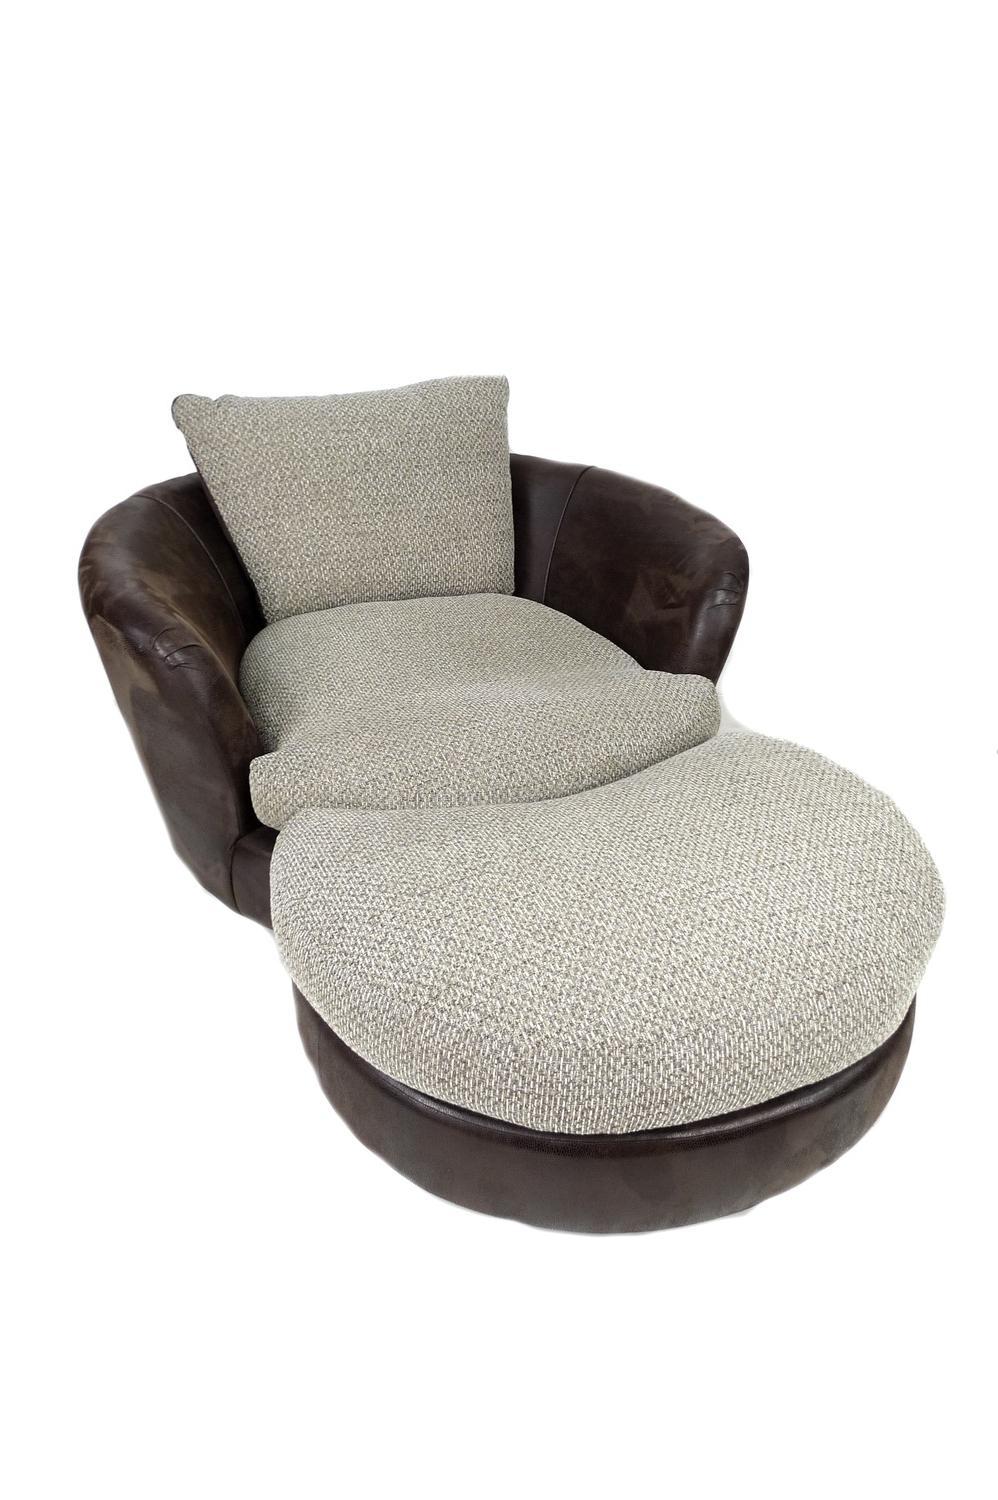 A Maddison contemporary circular form swivel chair with foot matching stool with cushions, chair 135